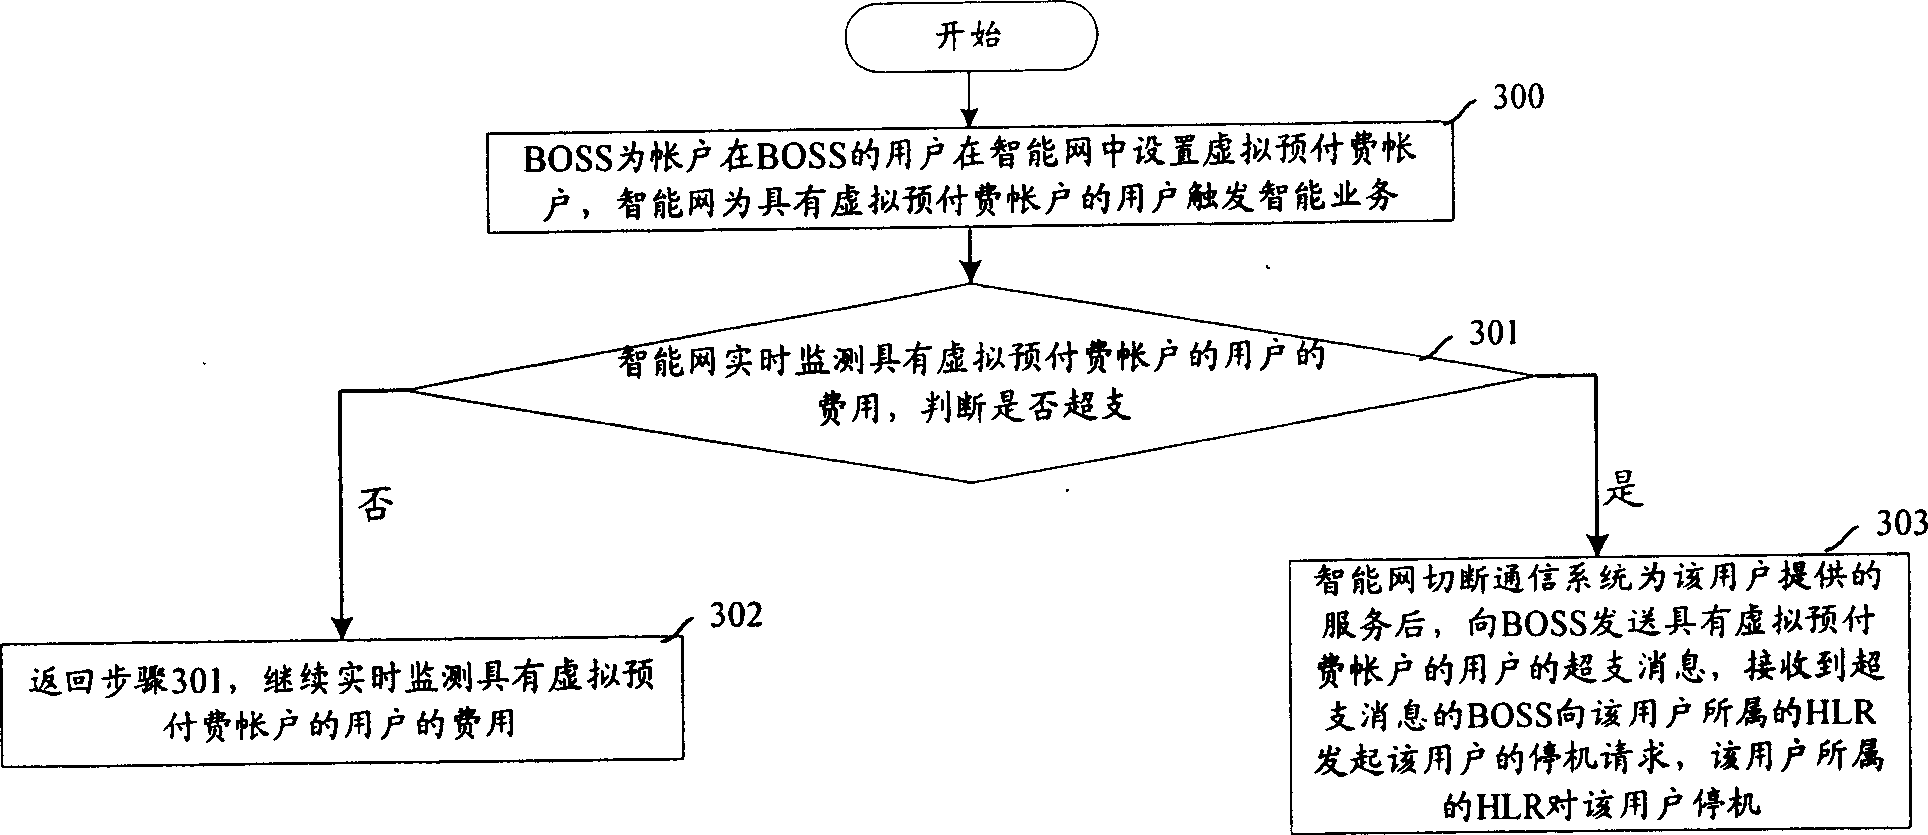 Method for avoiding user's default in service operation support support system of account